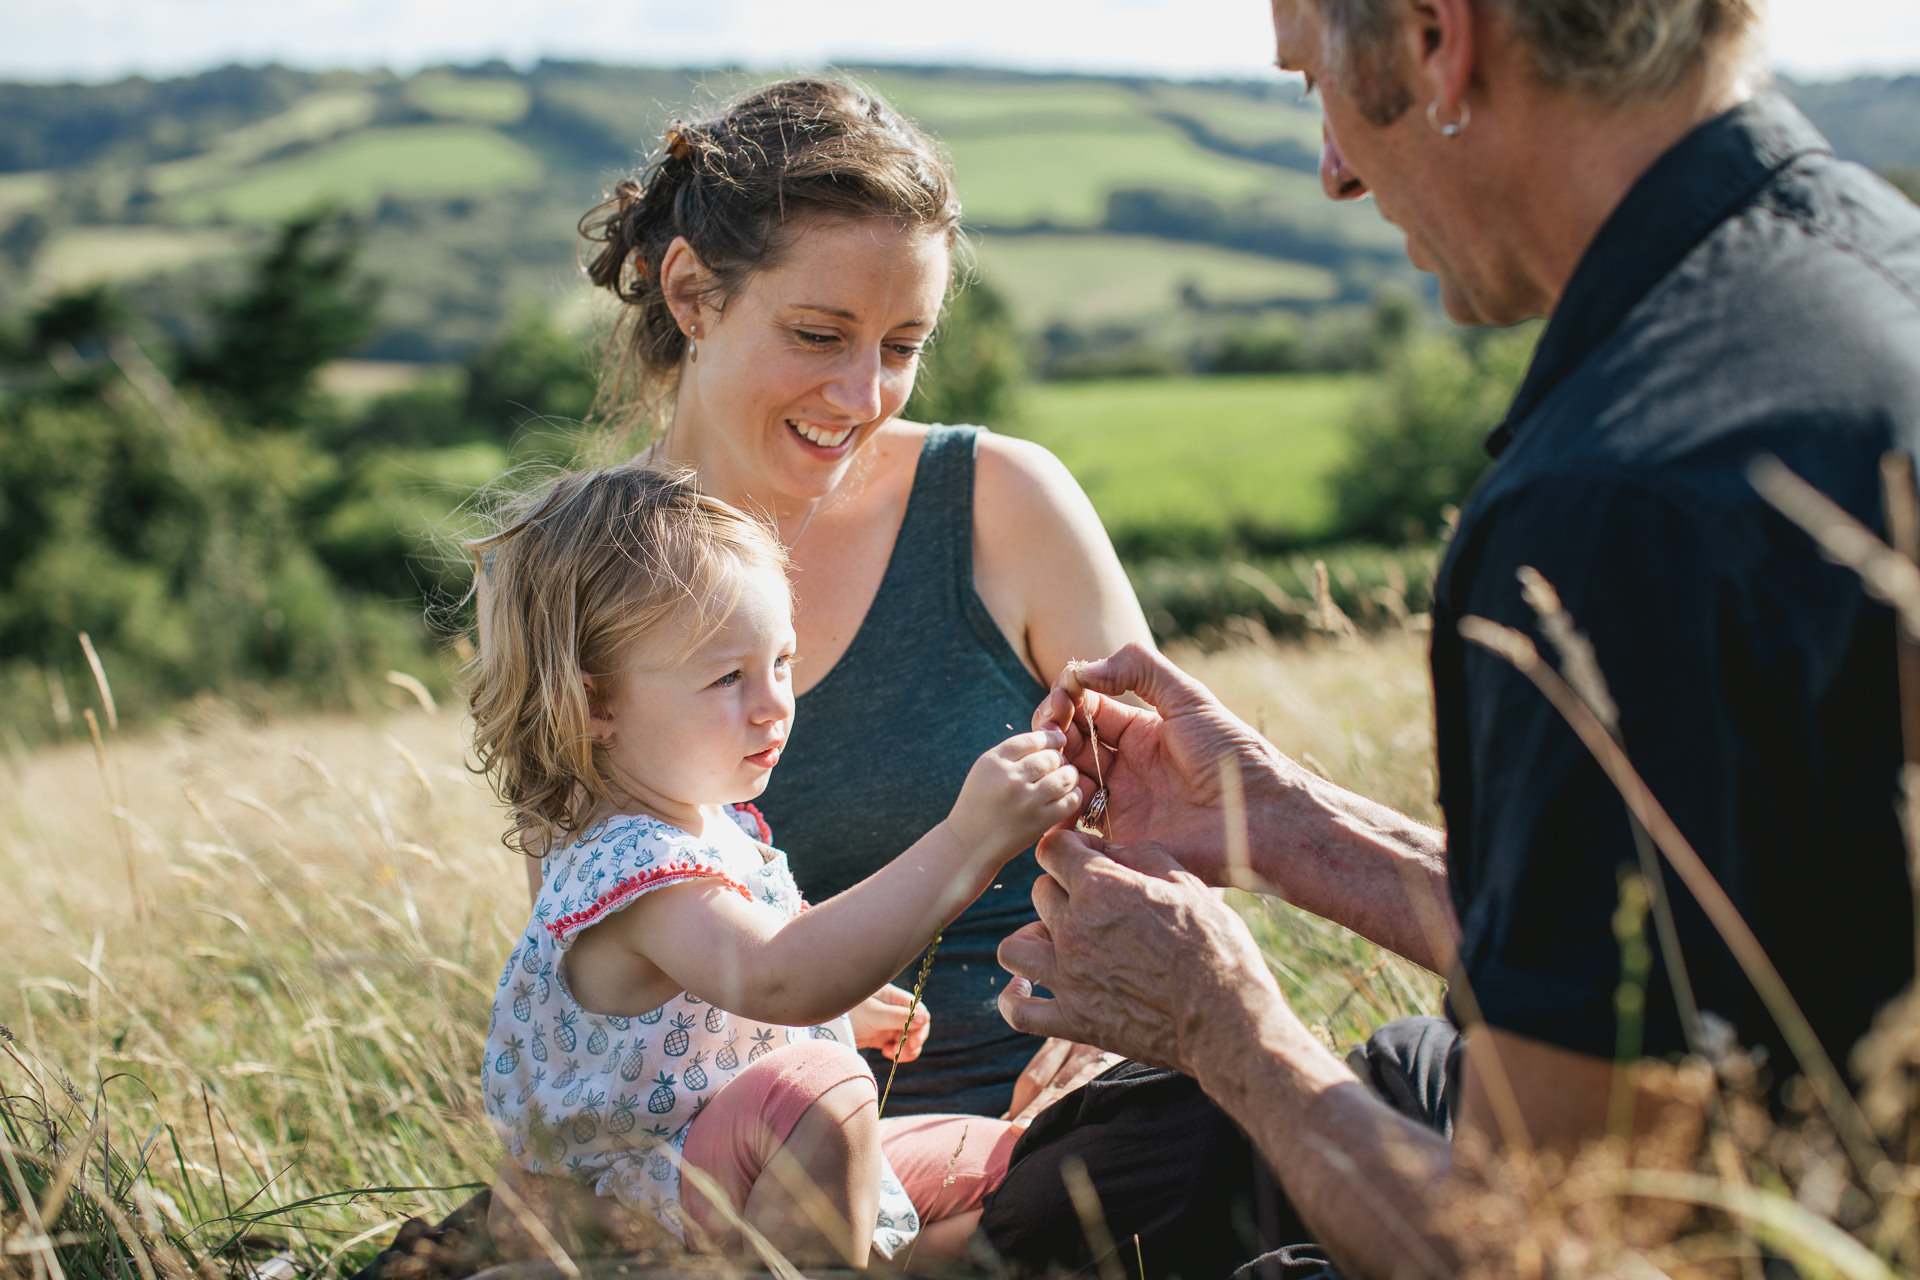 Two parents with a young daughter talking together in a field